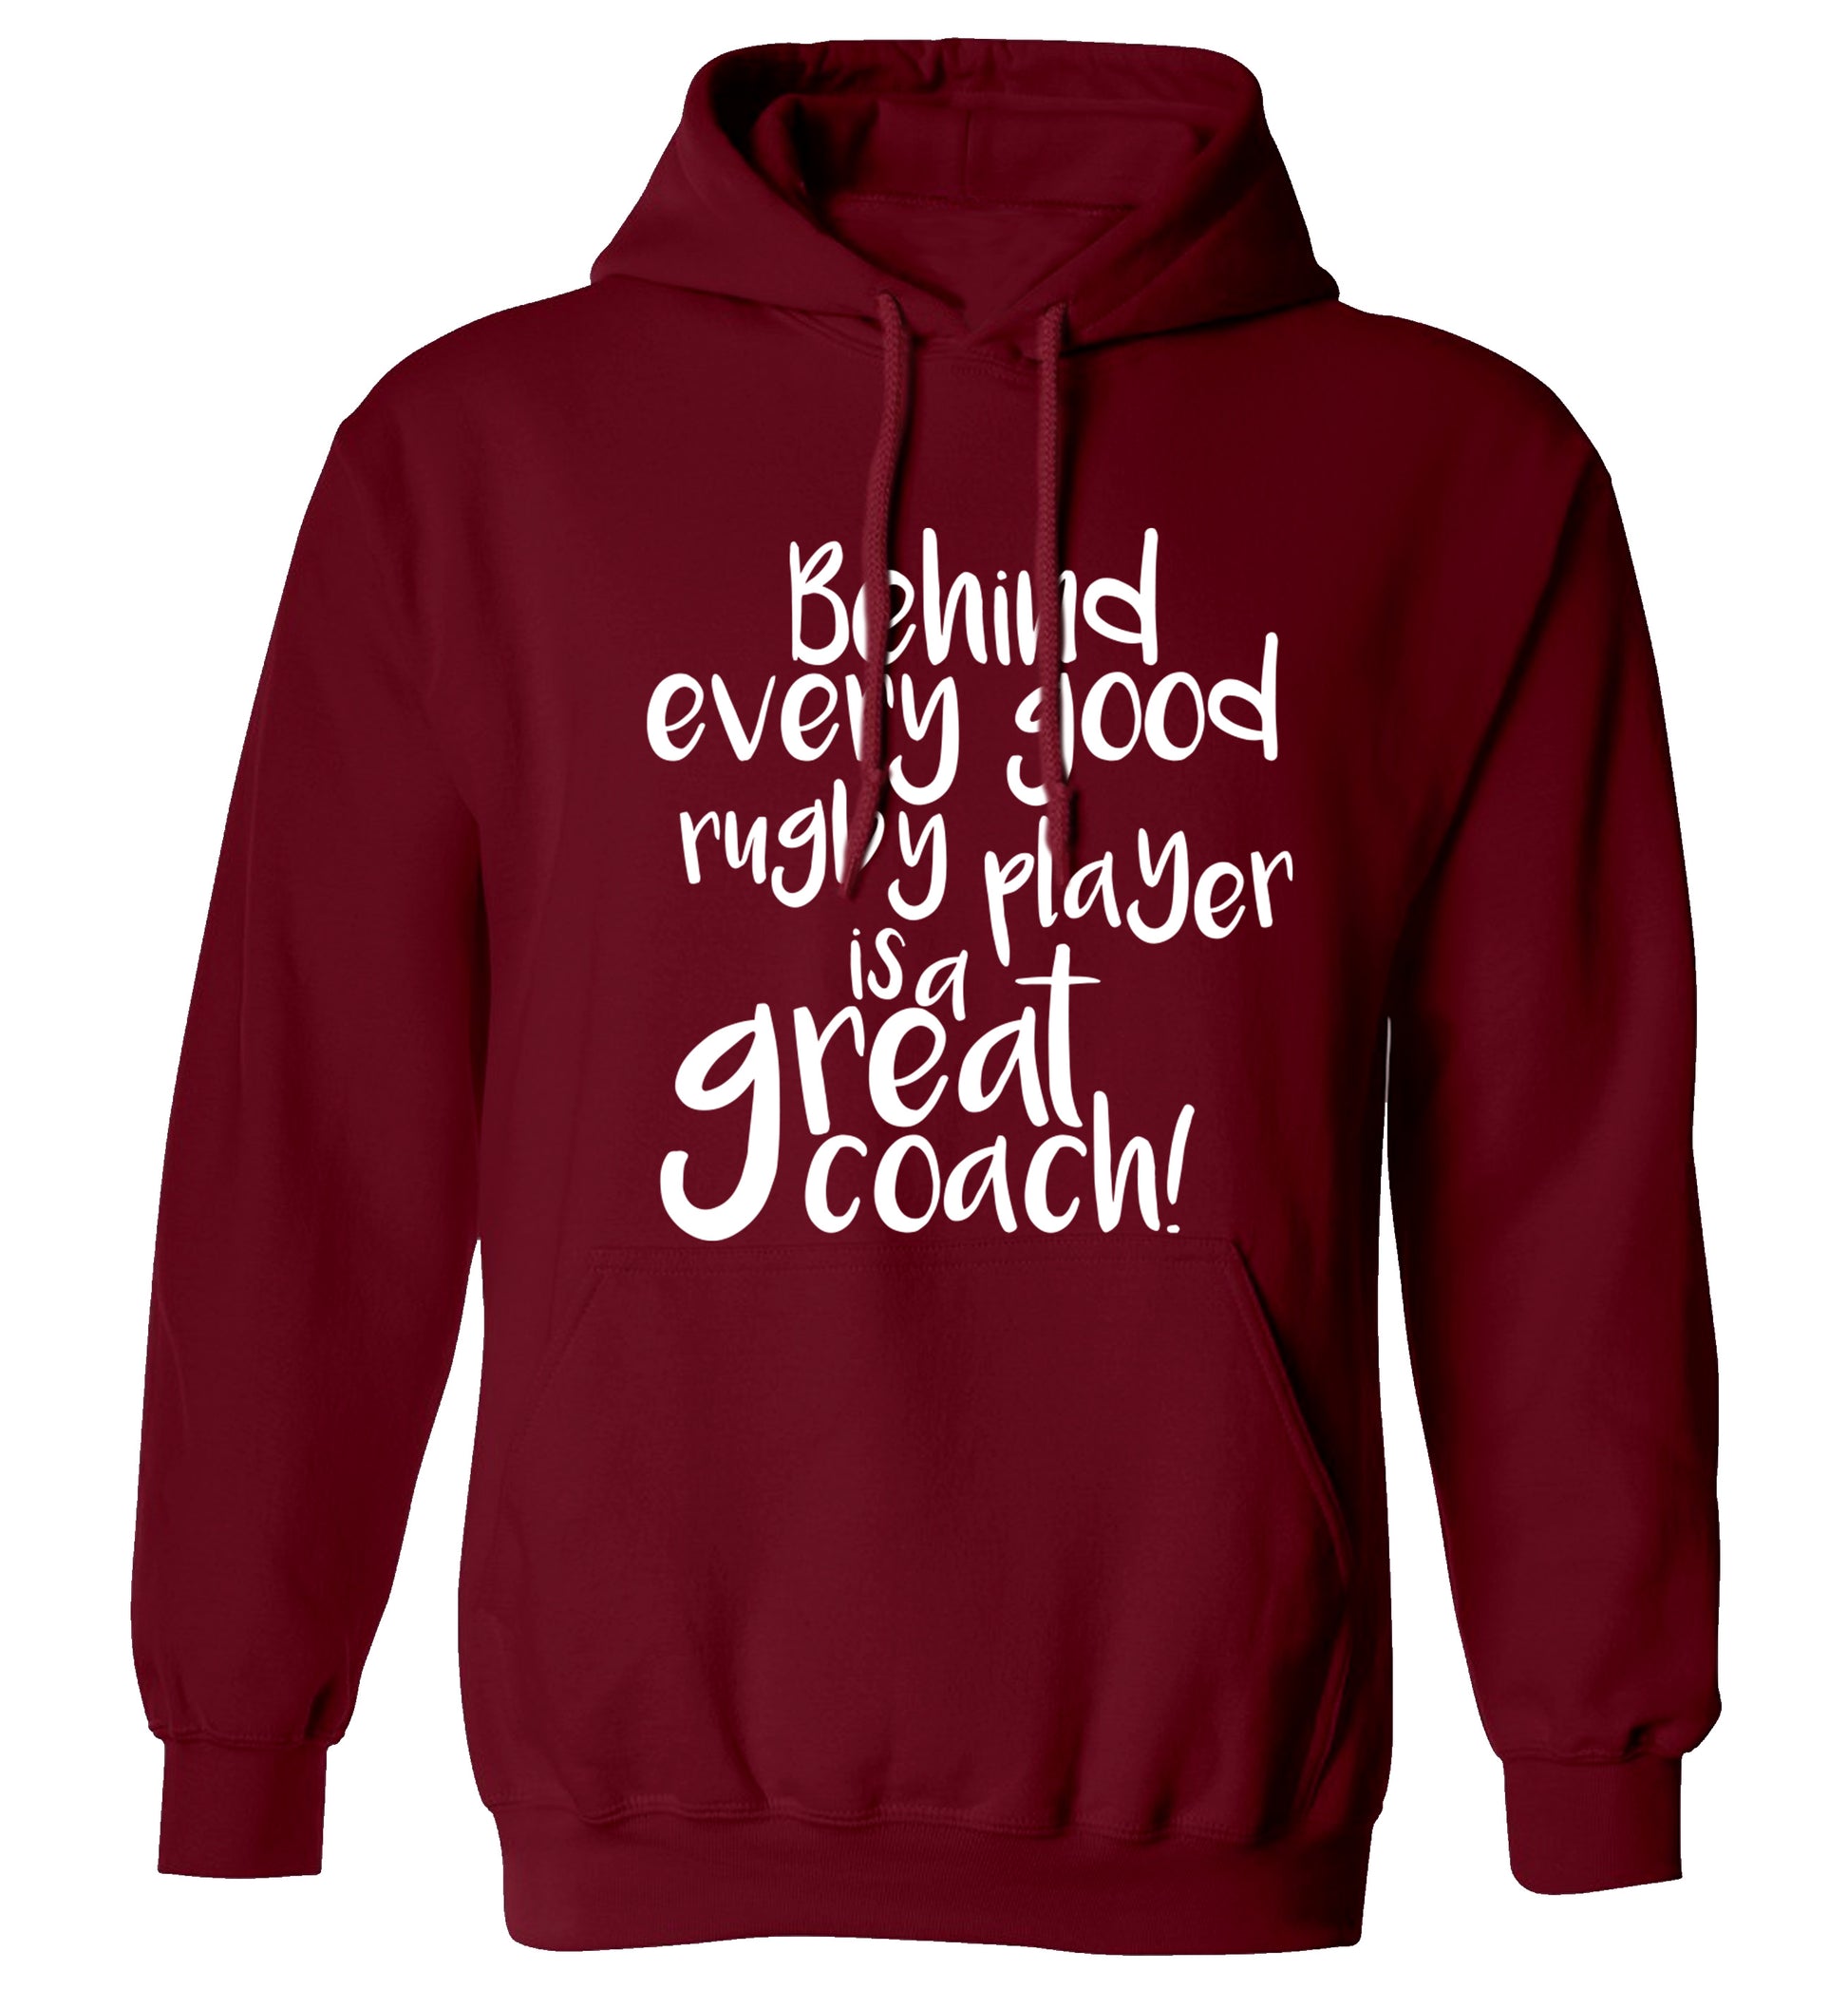 Behind every goor rugby player is a great coach adults unisex maroon hoodie 2XL